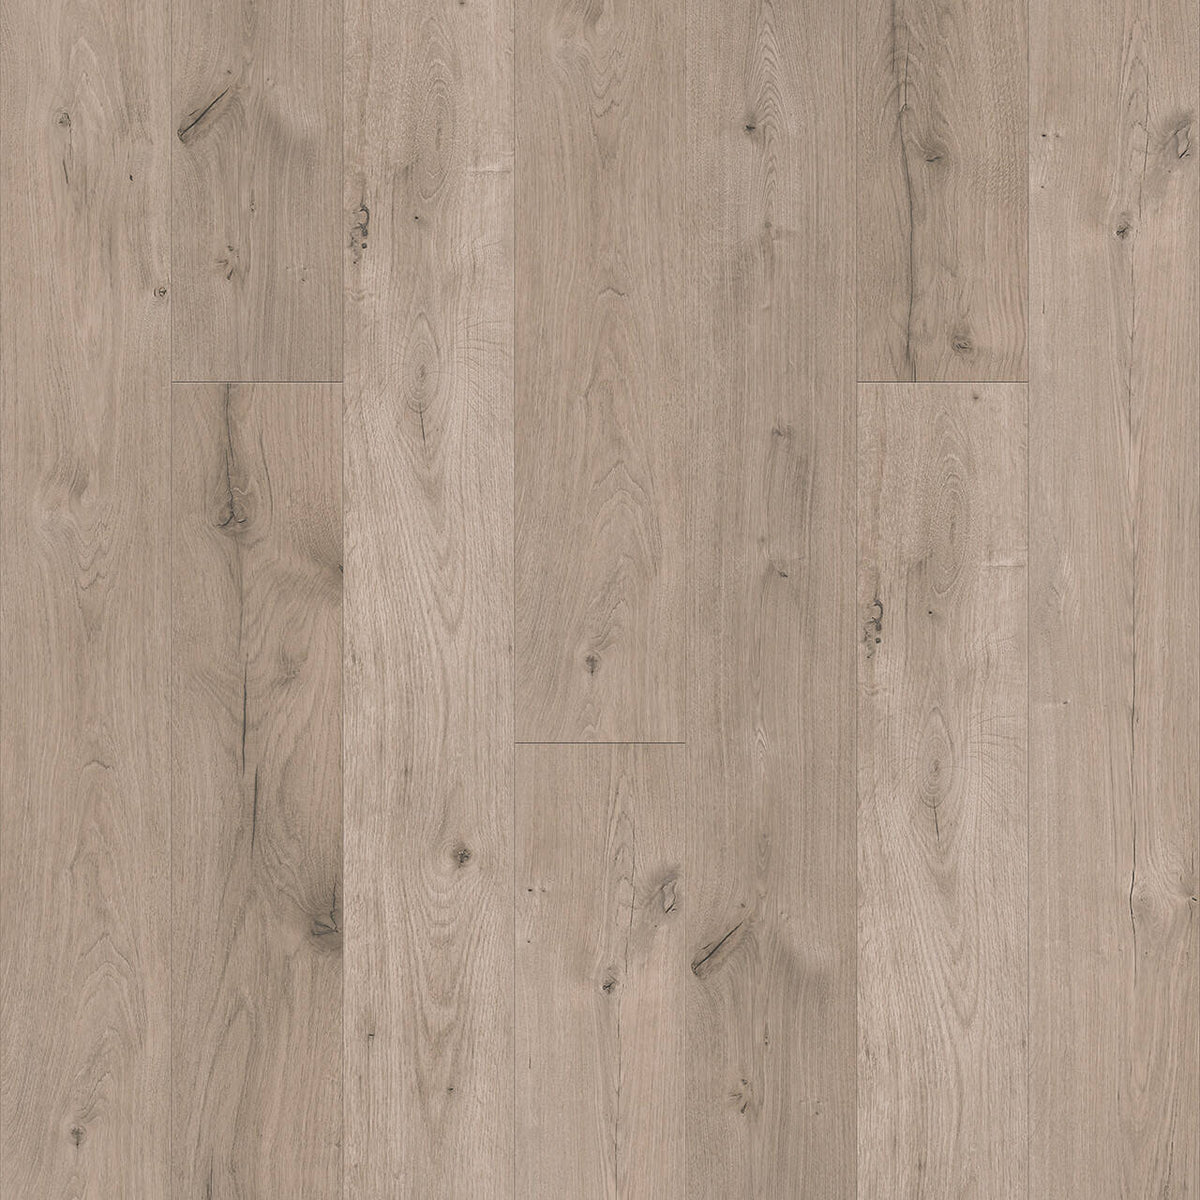 Engineered Floors - Wood Lux Collection - 8 in. x 54 in. - Charles Bridge